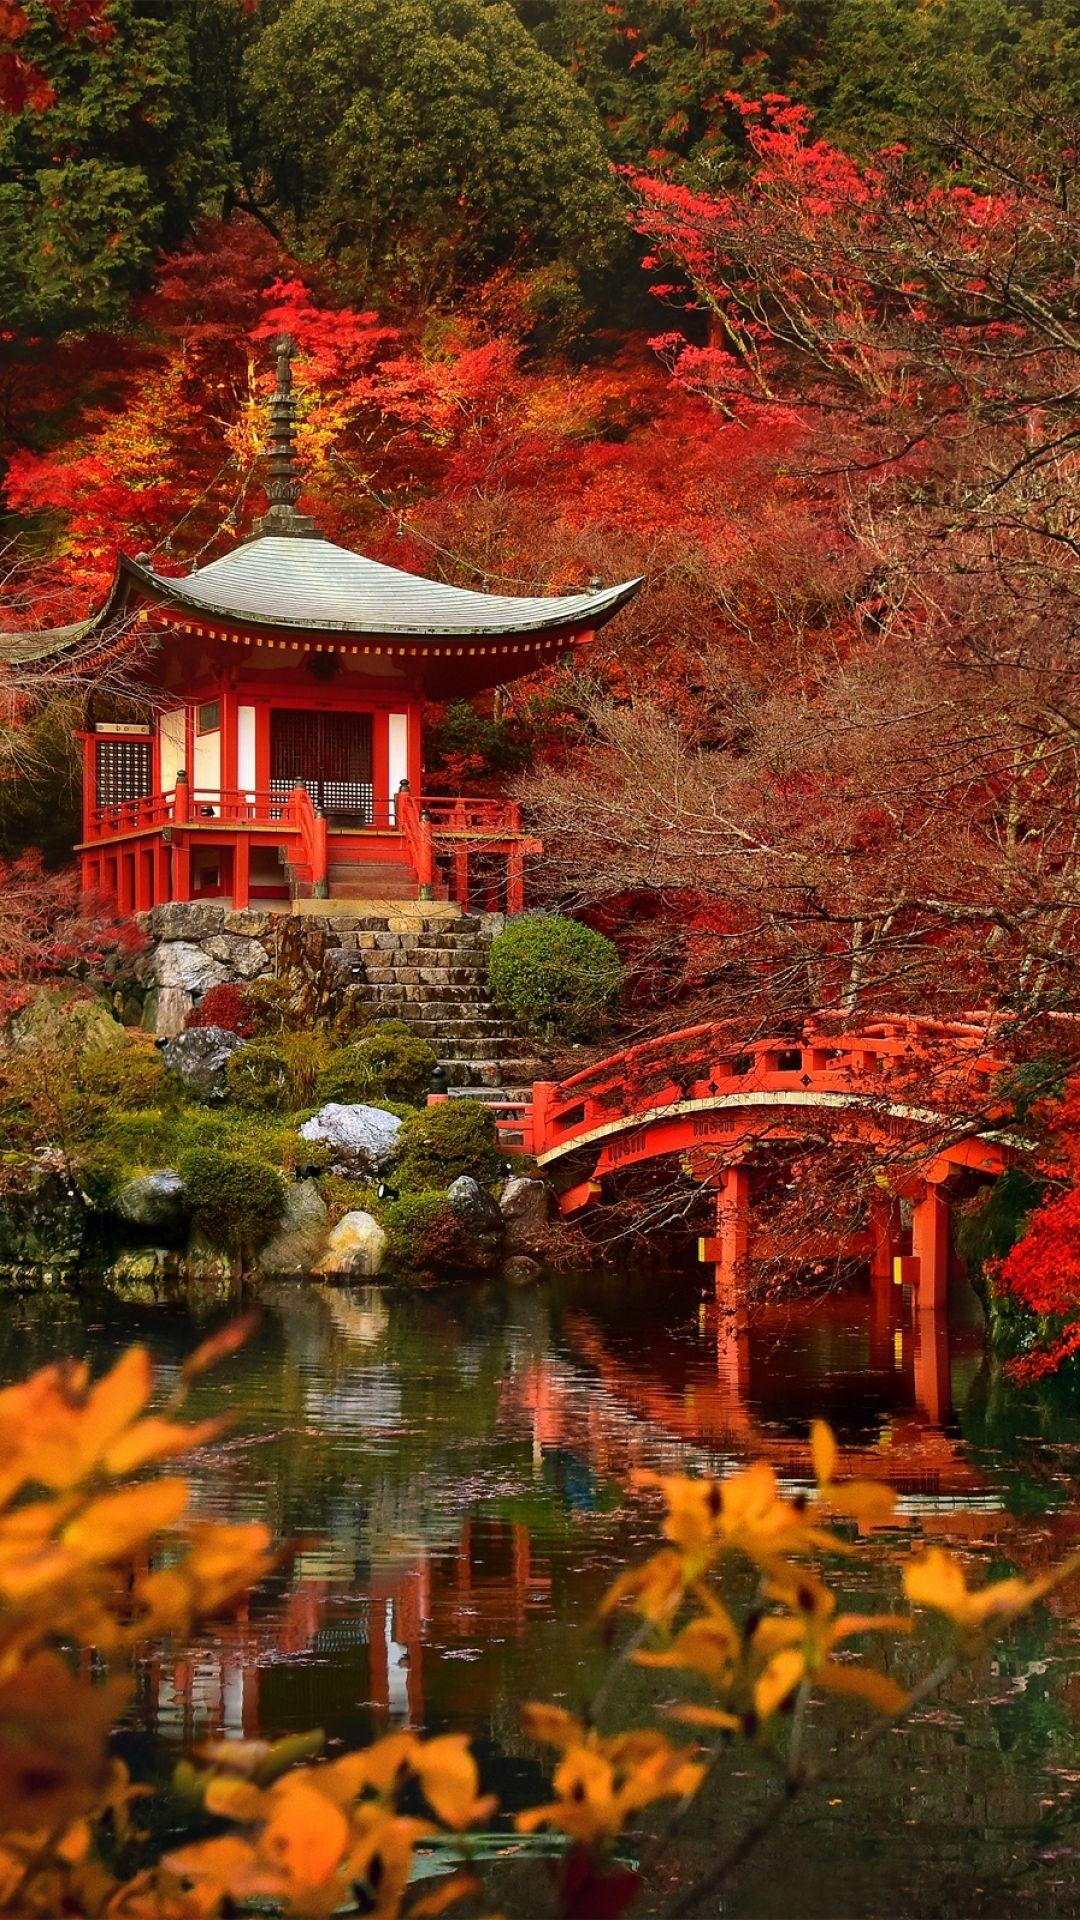 Autumn In Japan to see more beautiful nature